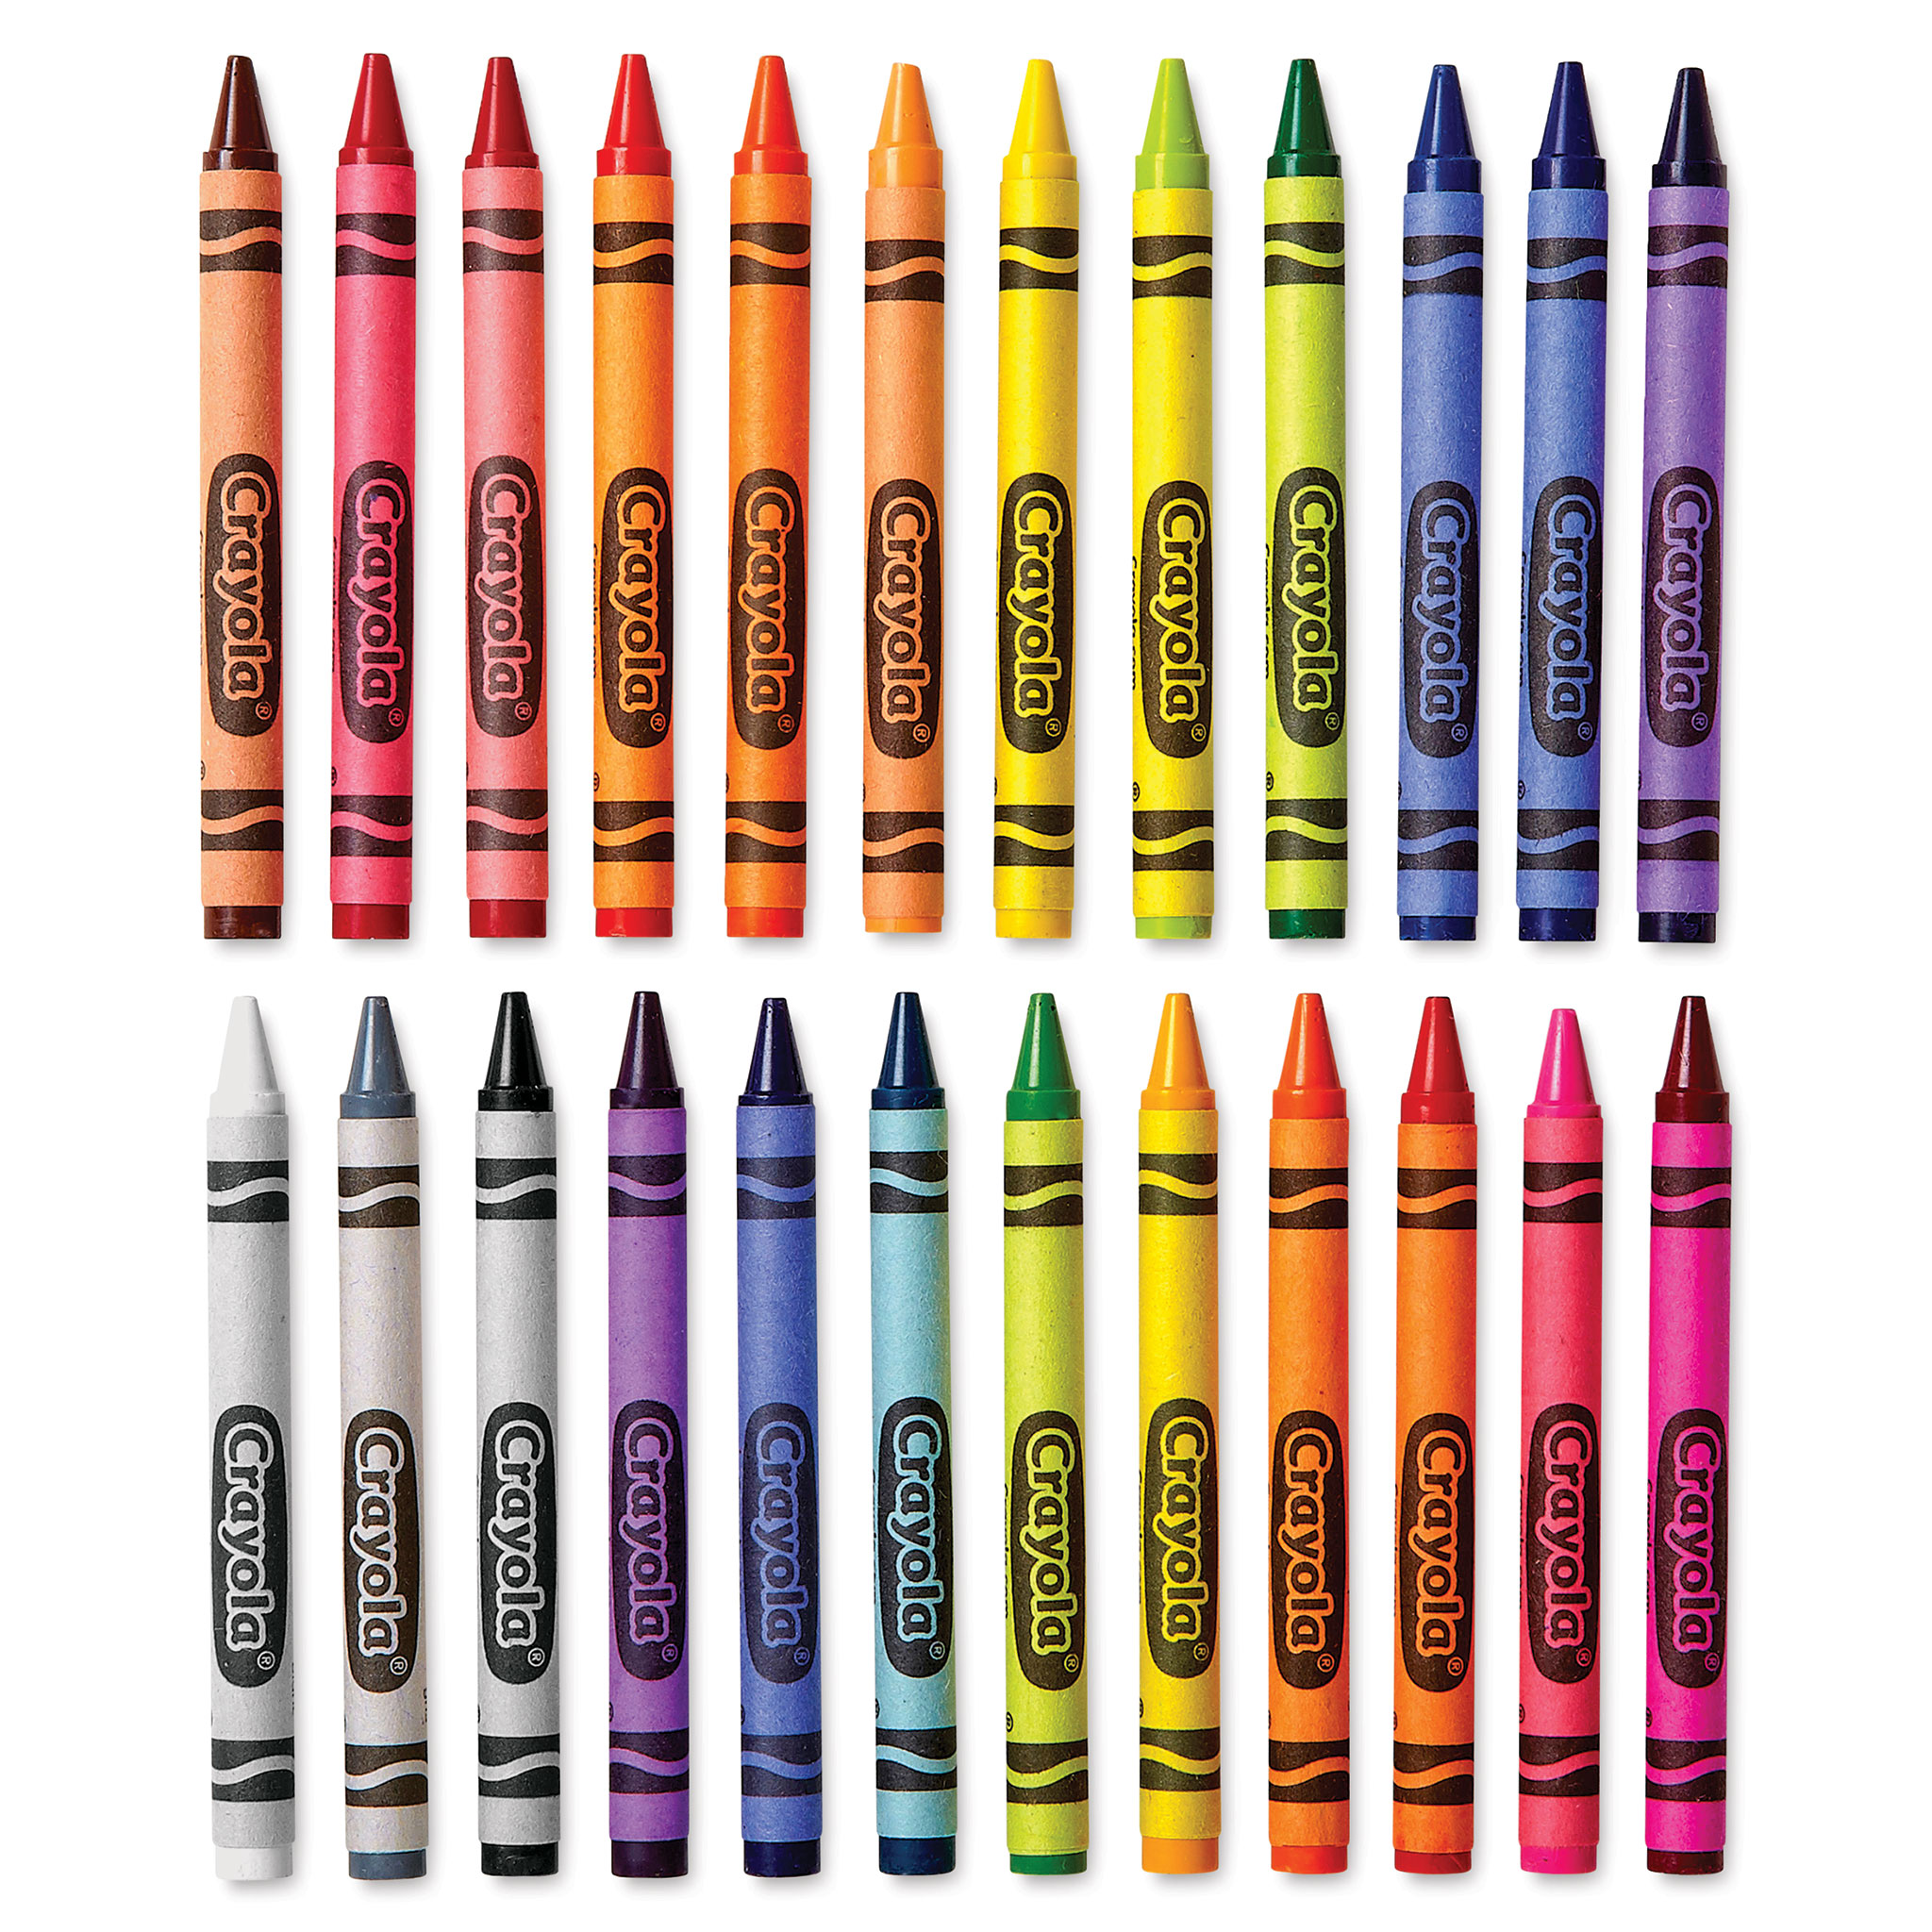 CRAYOLA CRAYONS COLORS OF KINDNESS 24 COUNT